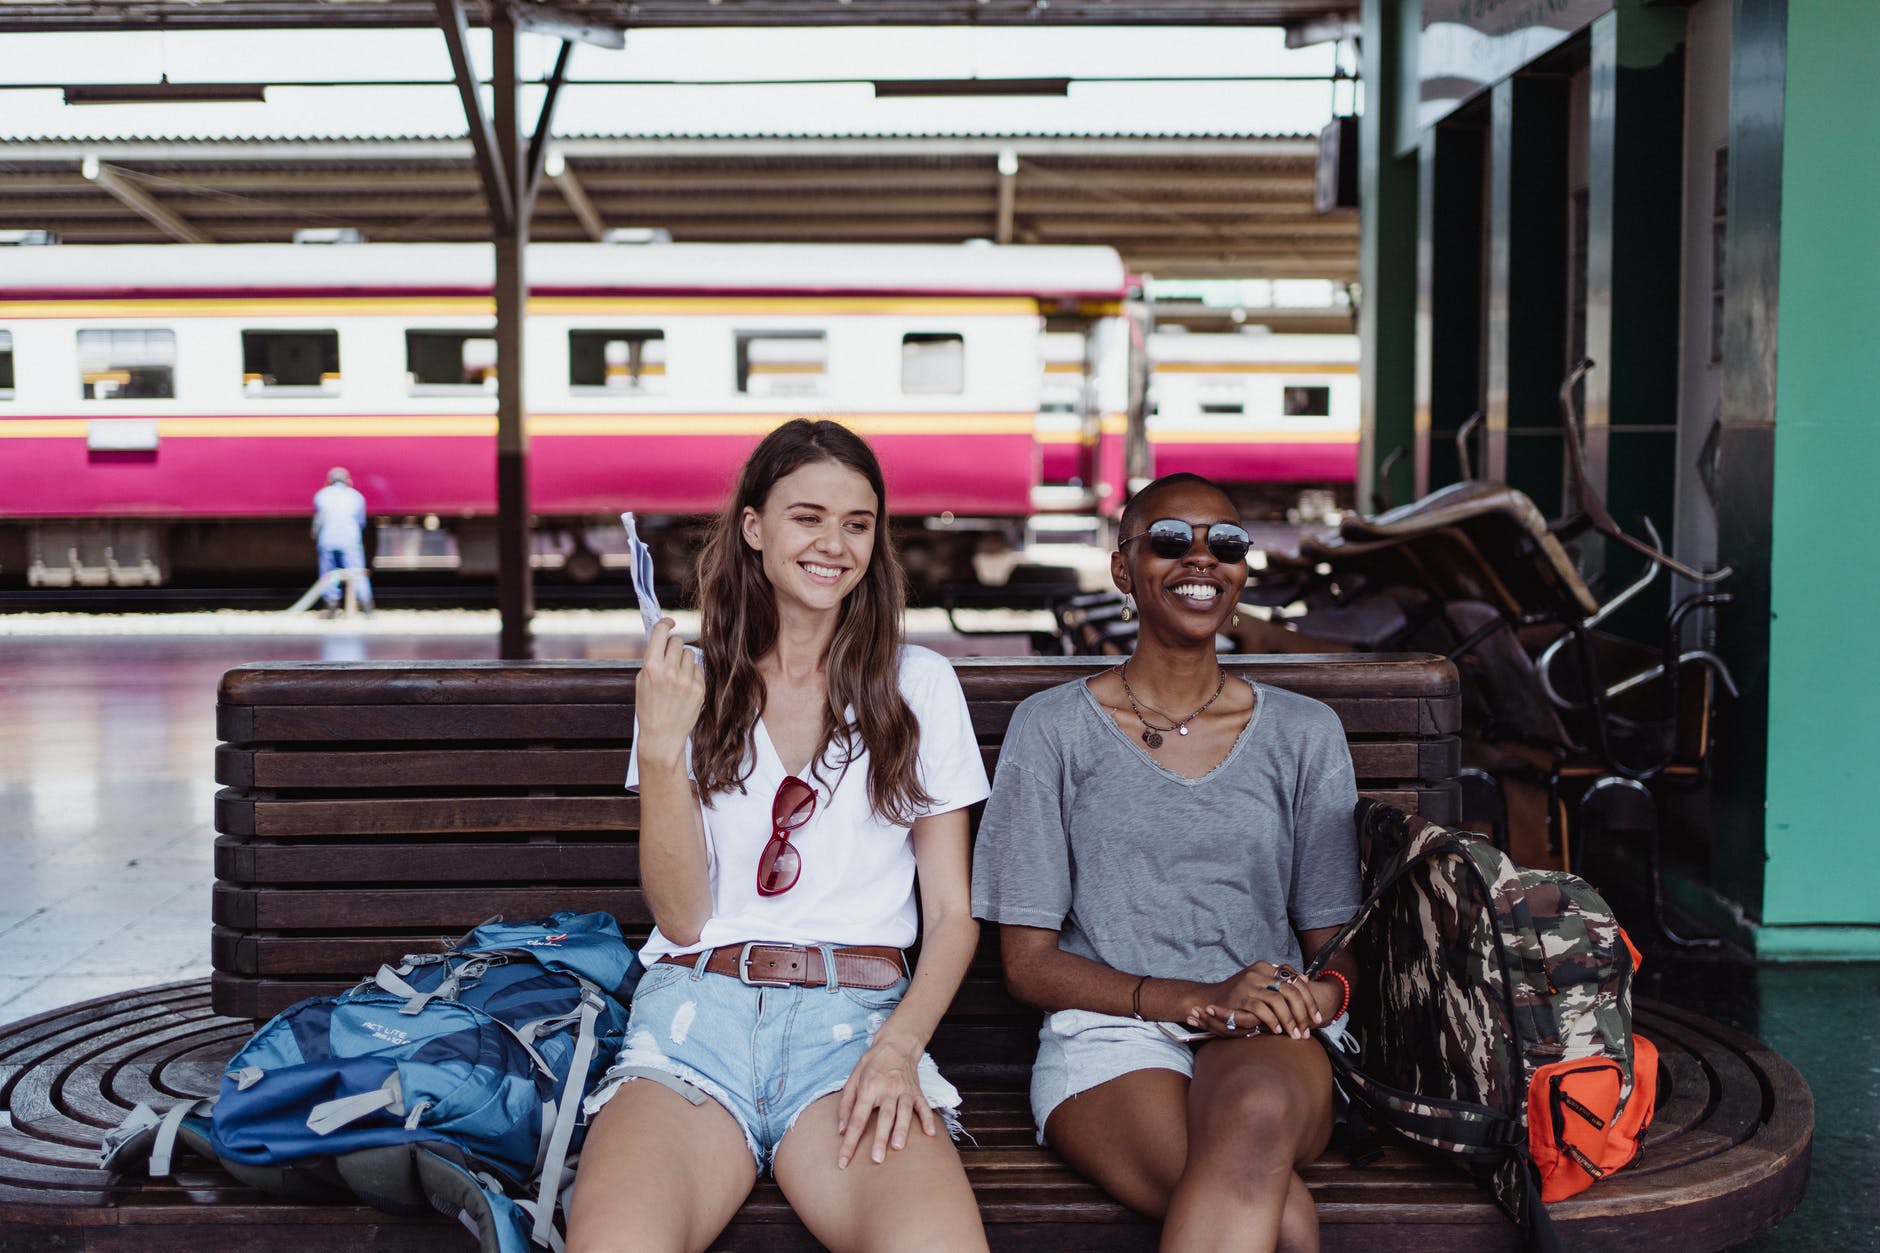 women sitting on a bench on a train platform and smiling